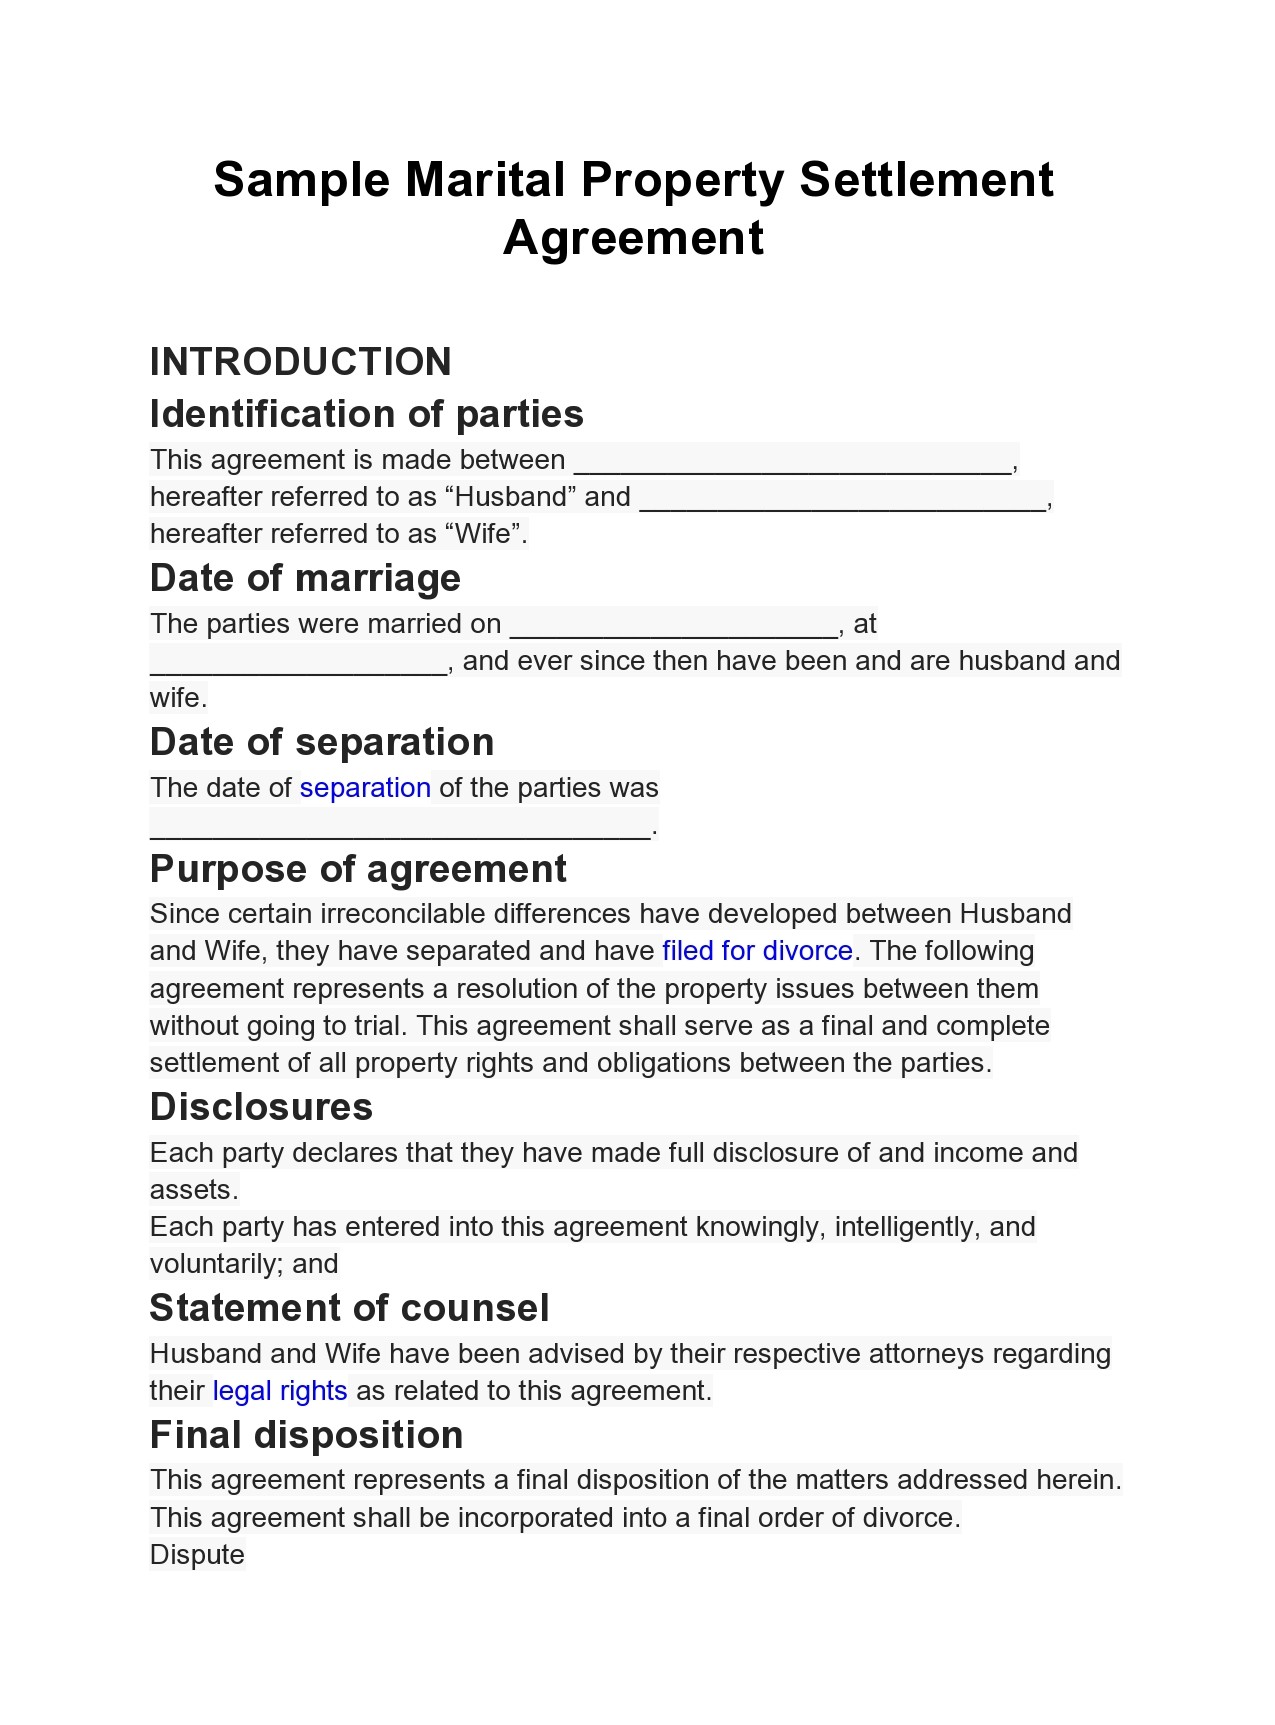 property-divorce-settlement-agreement-template-are-you-looking-for